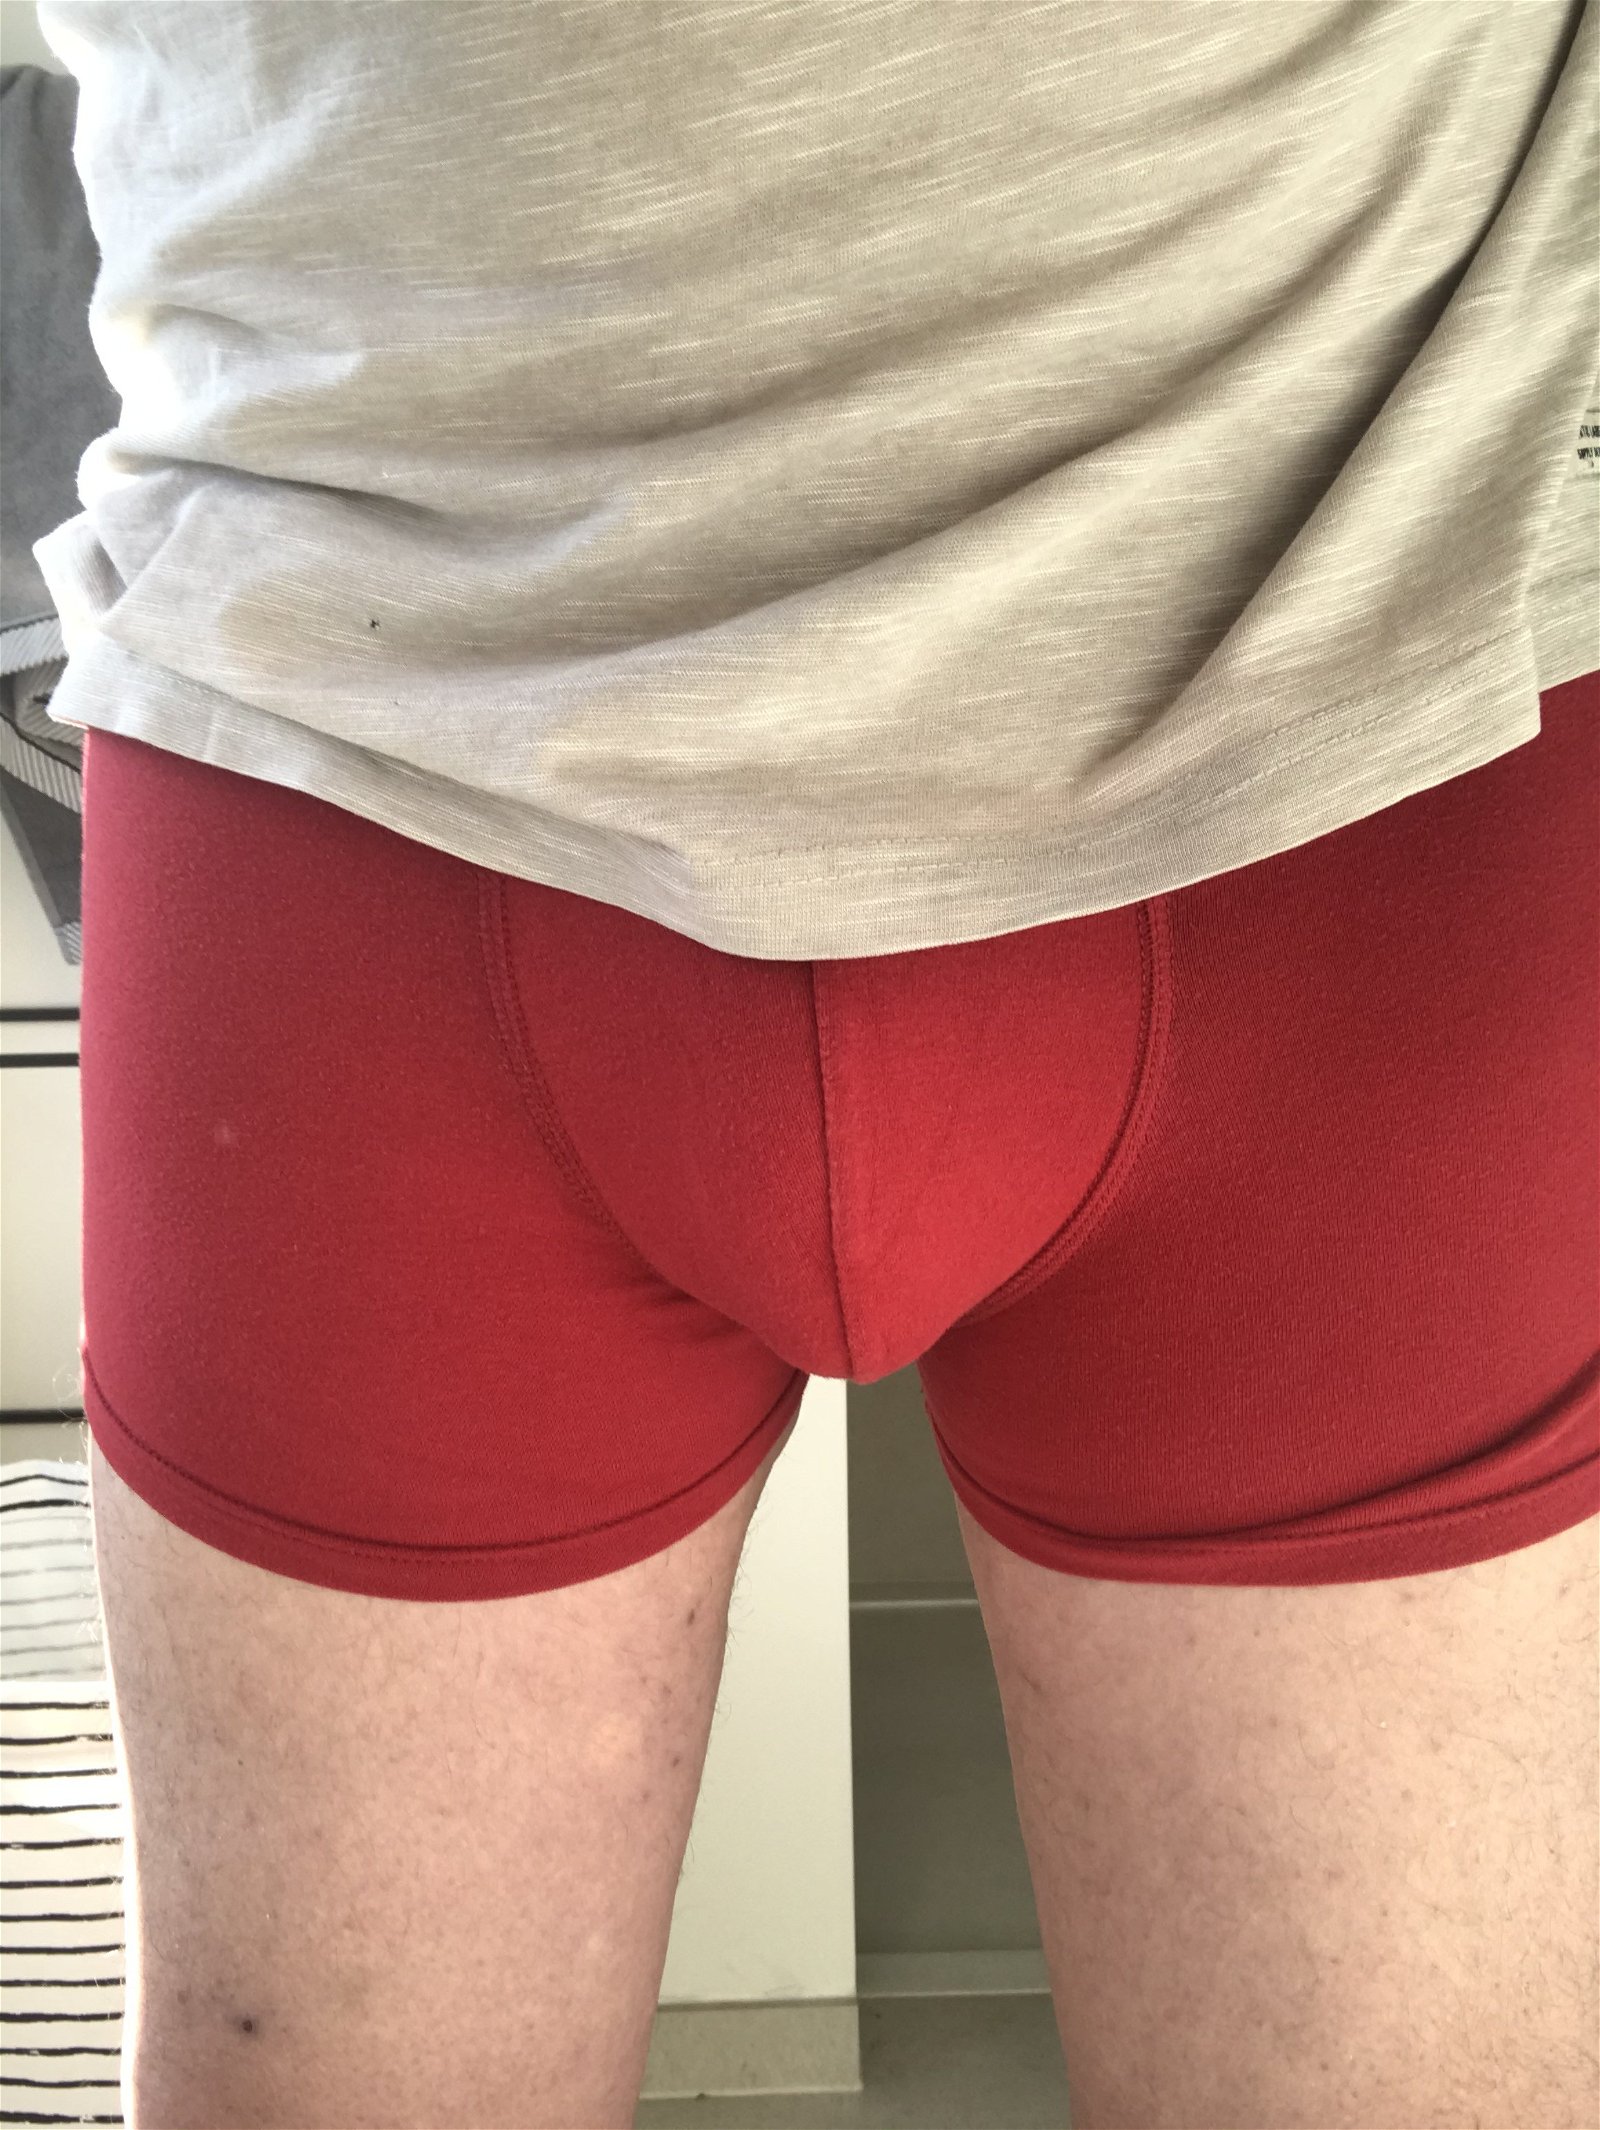 Photo by Jurl Varg with the username @jurlvarg,  May 14, 2020 at 7:38 PM. The post is about the topic Homemade and the text says 'Any ladies or couples want me to wet these for them?
#pee #piss #shorts #selfie #me #homemade #amateur #request'